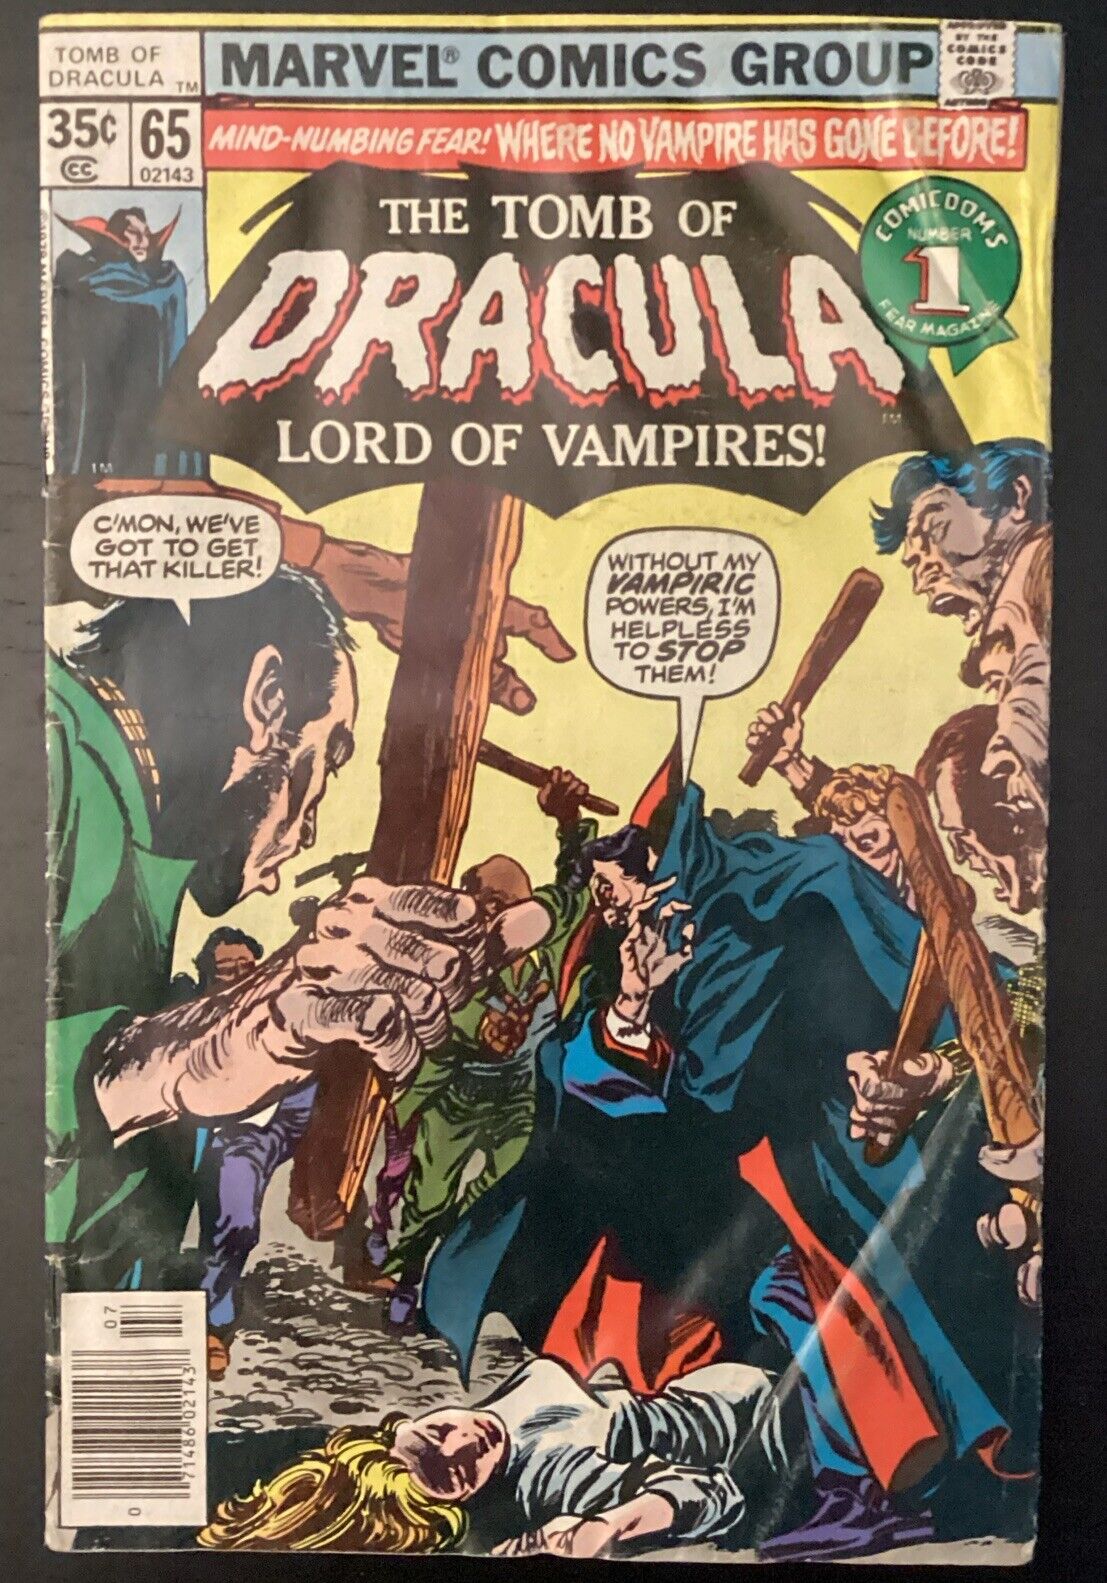 The Tomb of Dracula #65 Lord of Vampires Marvel Comic Book 1978